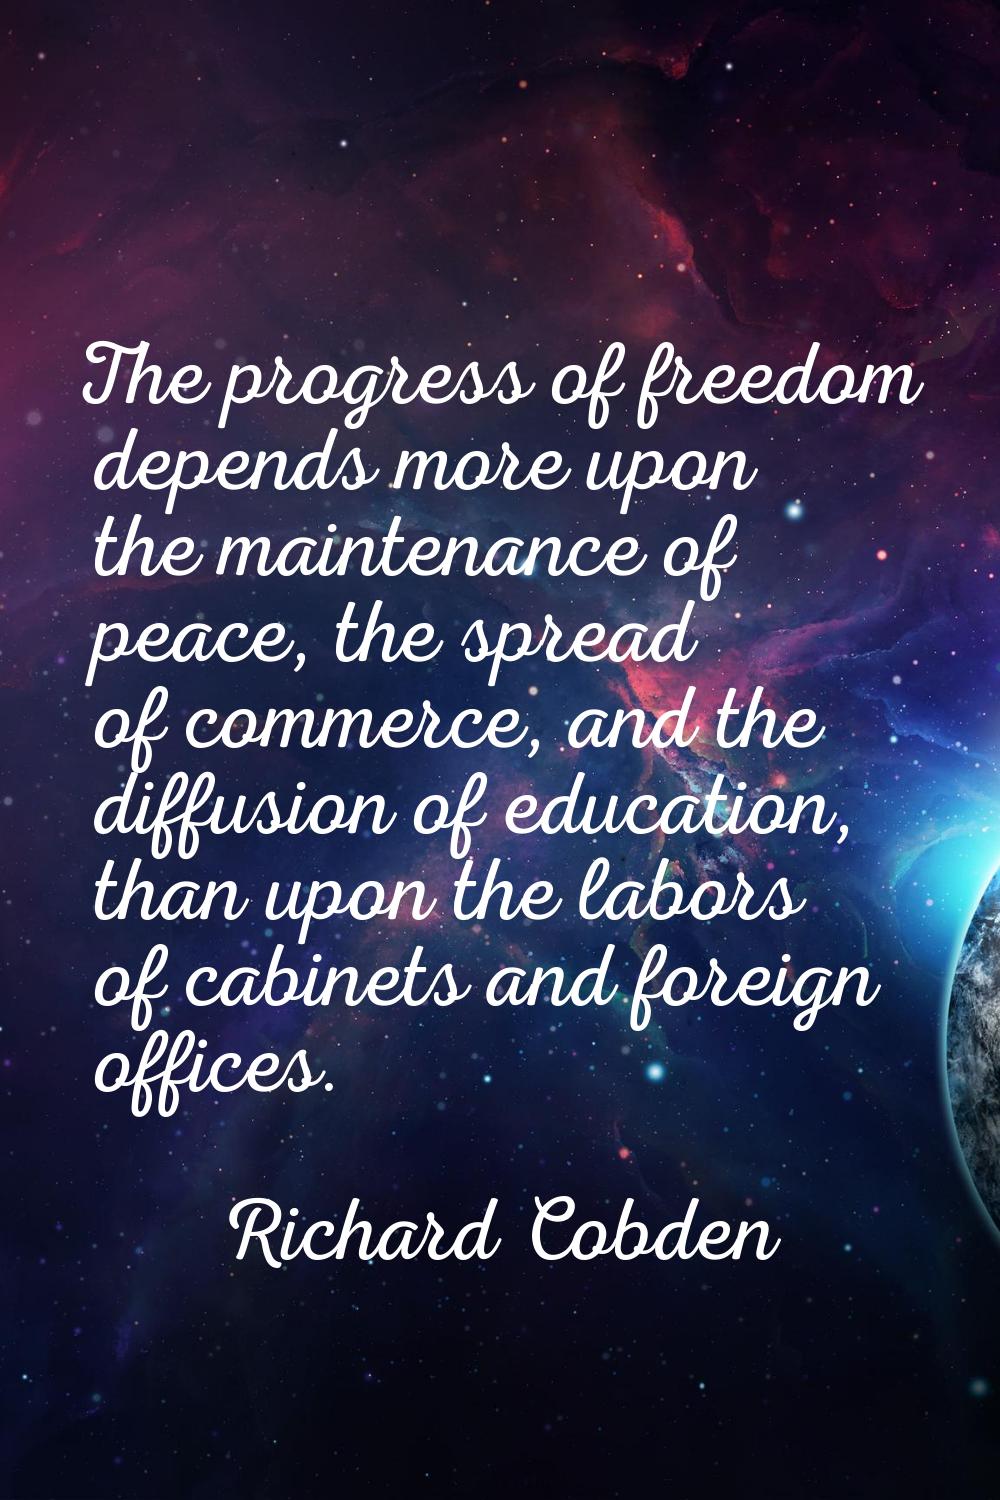 The progress of freedom depends more upon the maintenance of peace, the spread of commerce, and the